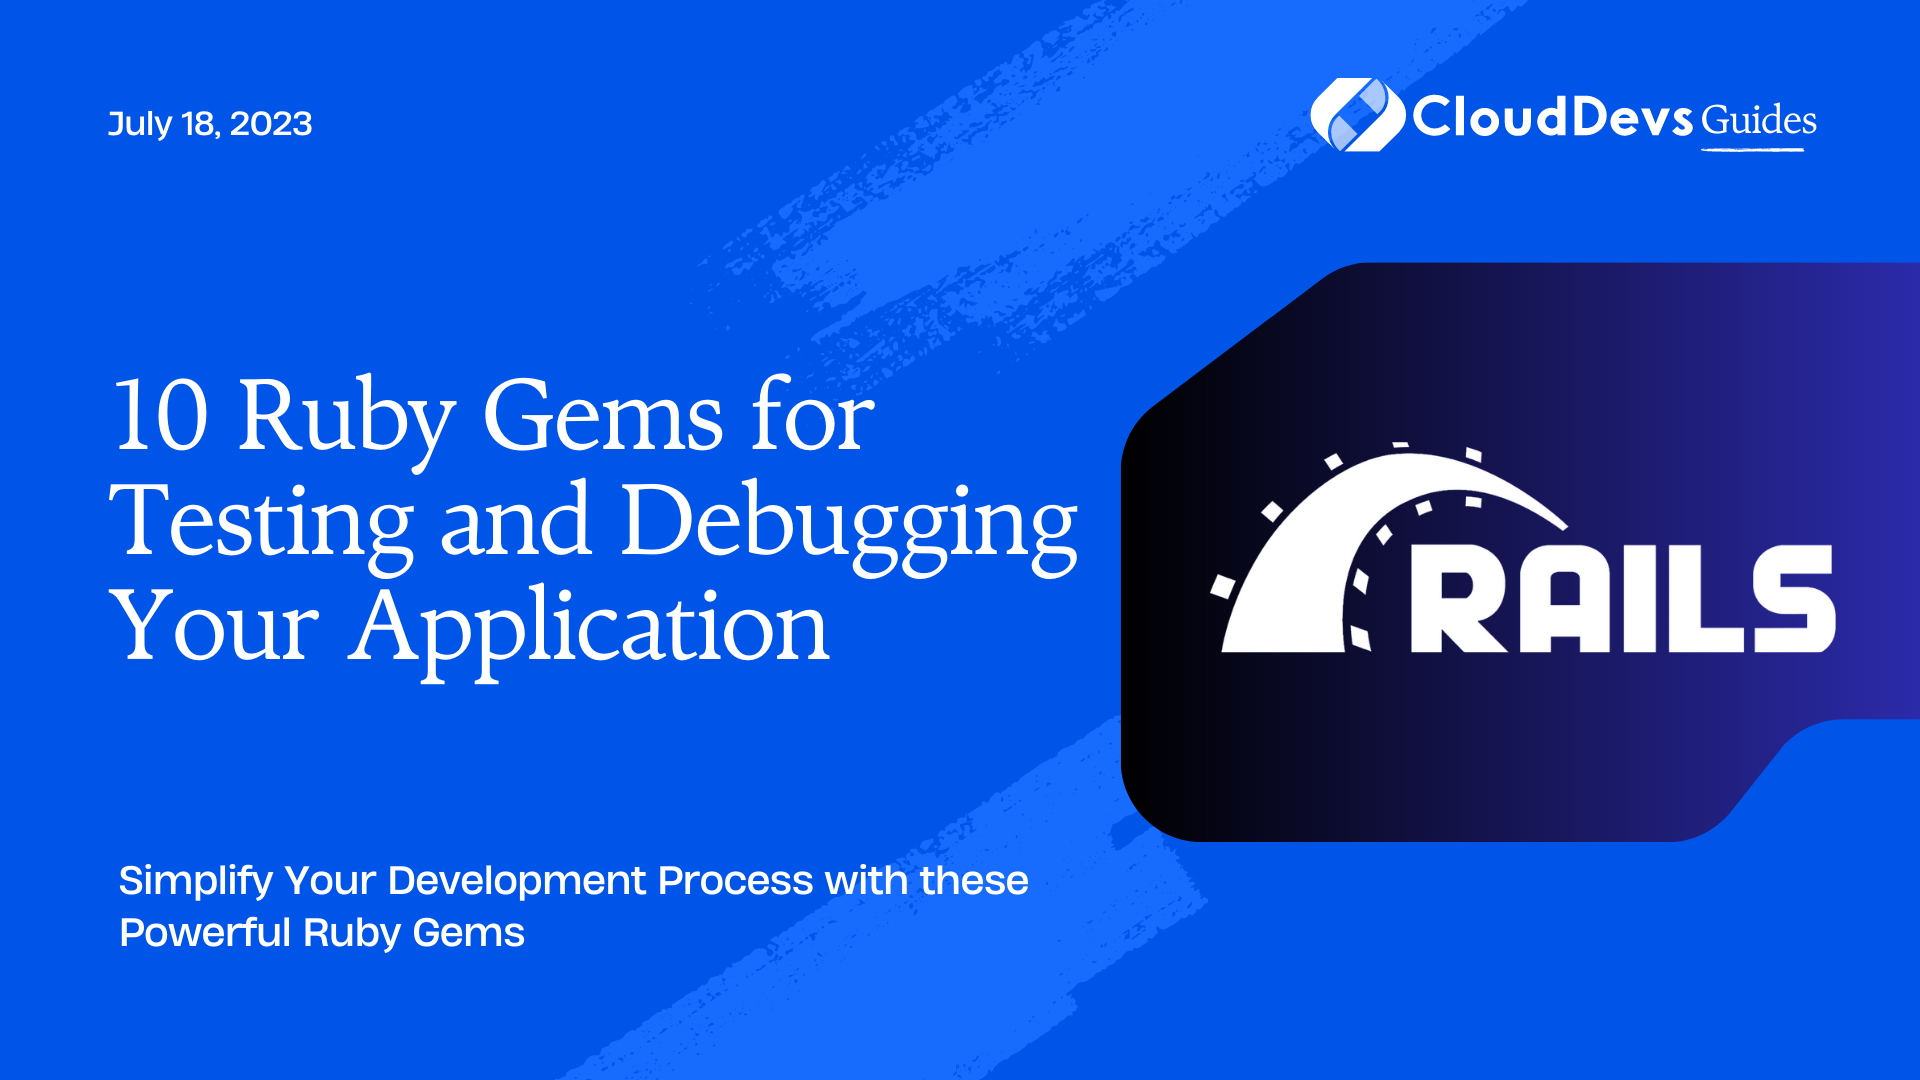 10 Ruby Gems for Testing and Debugging Your Application